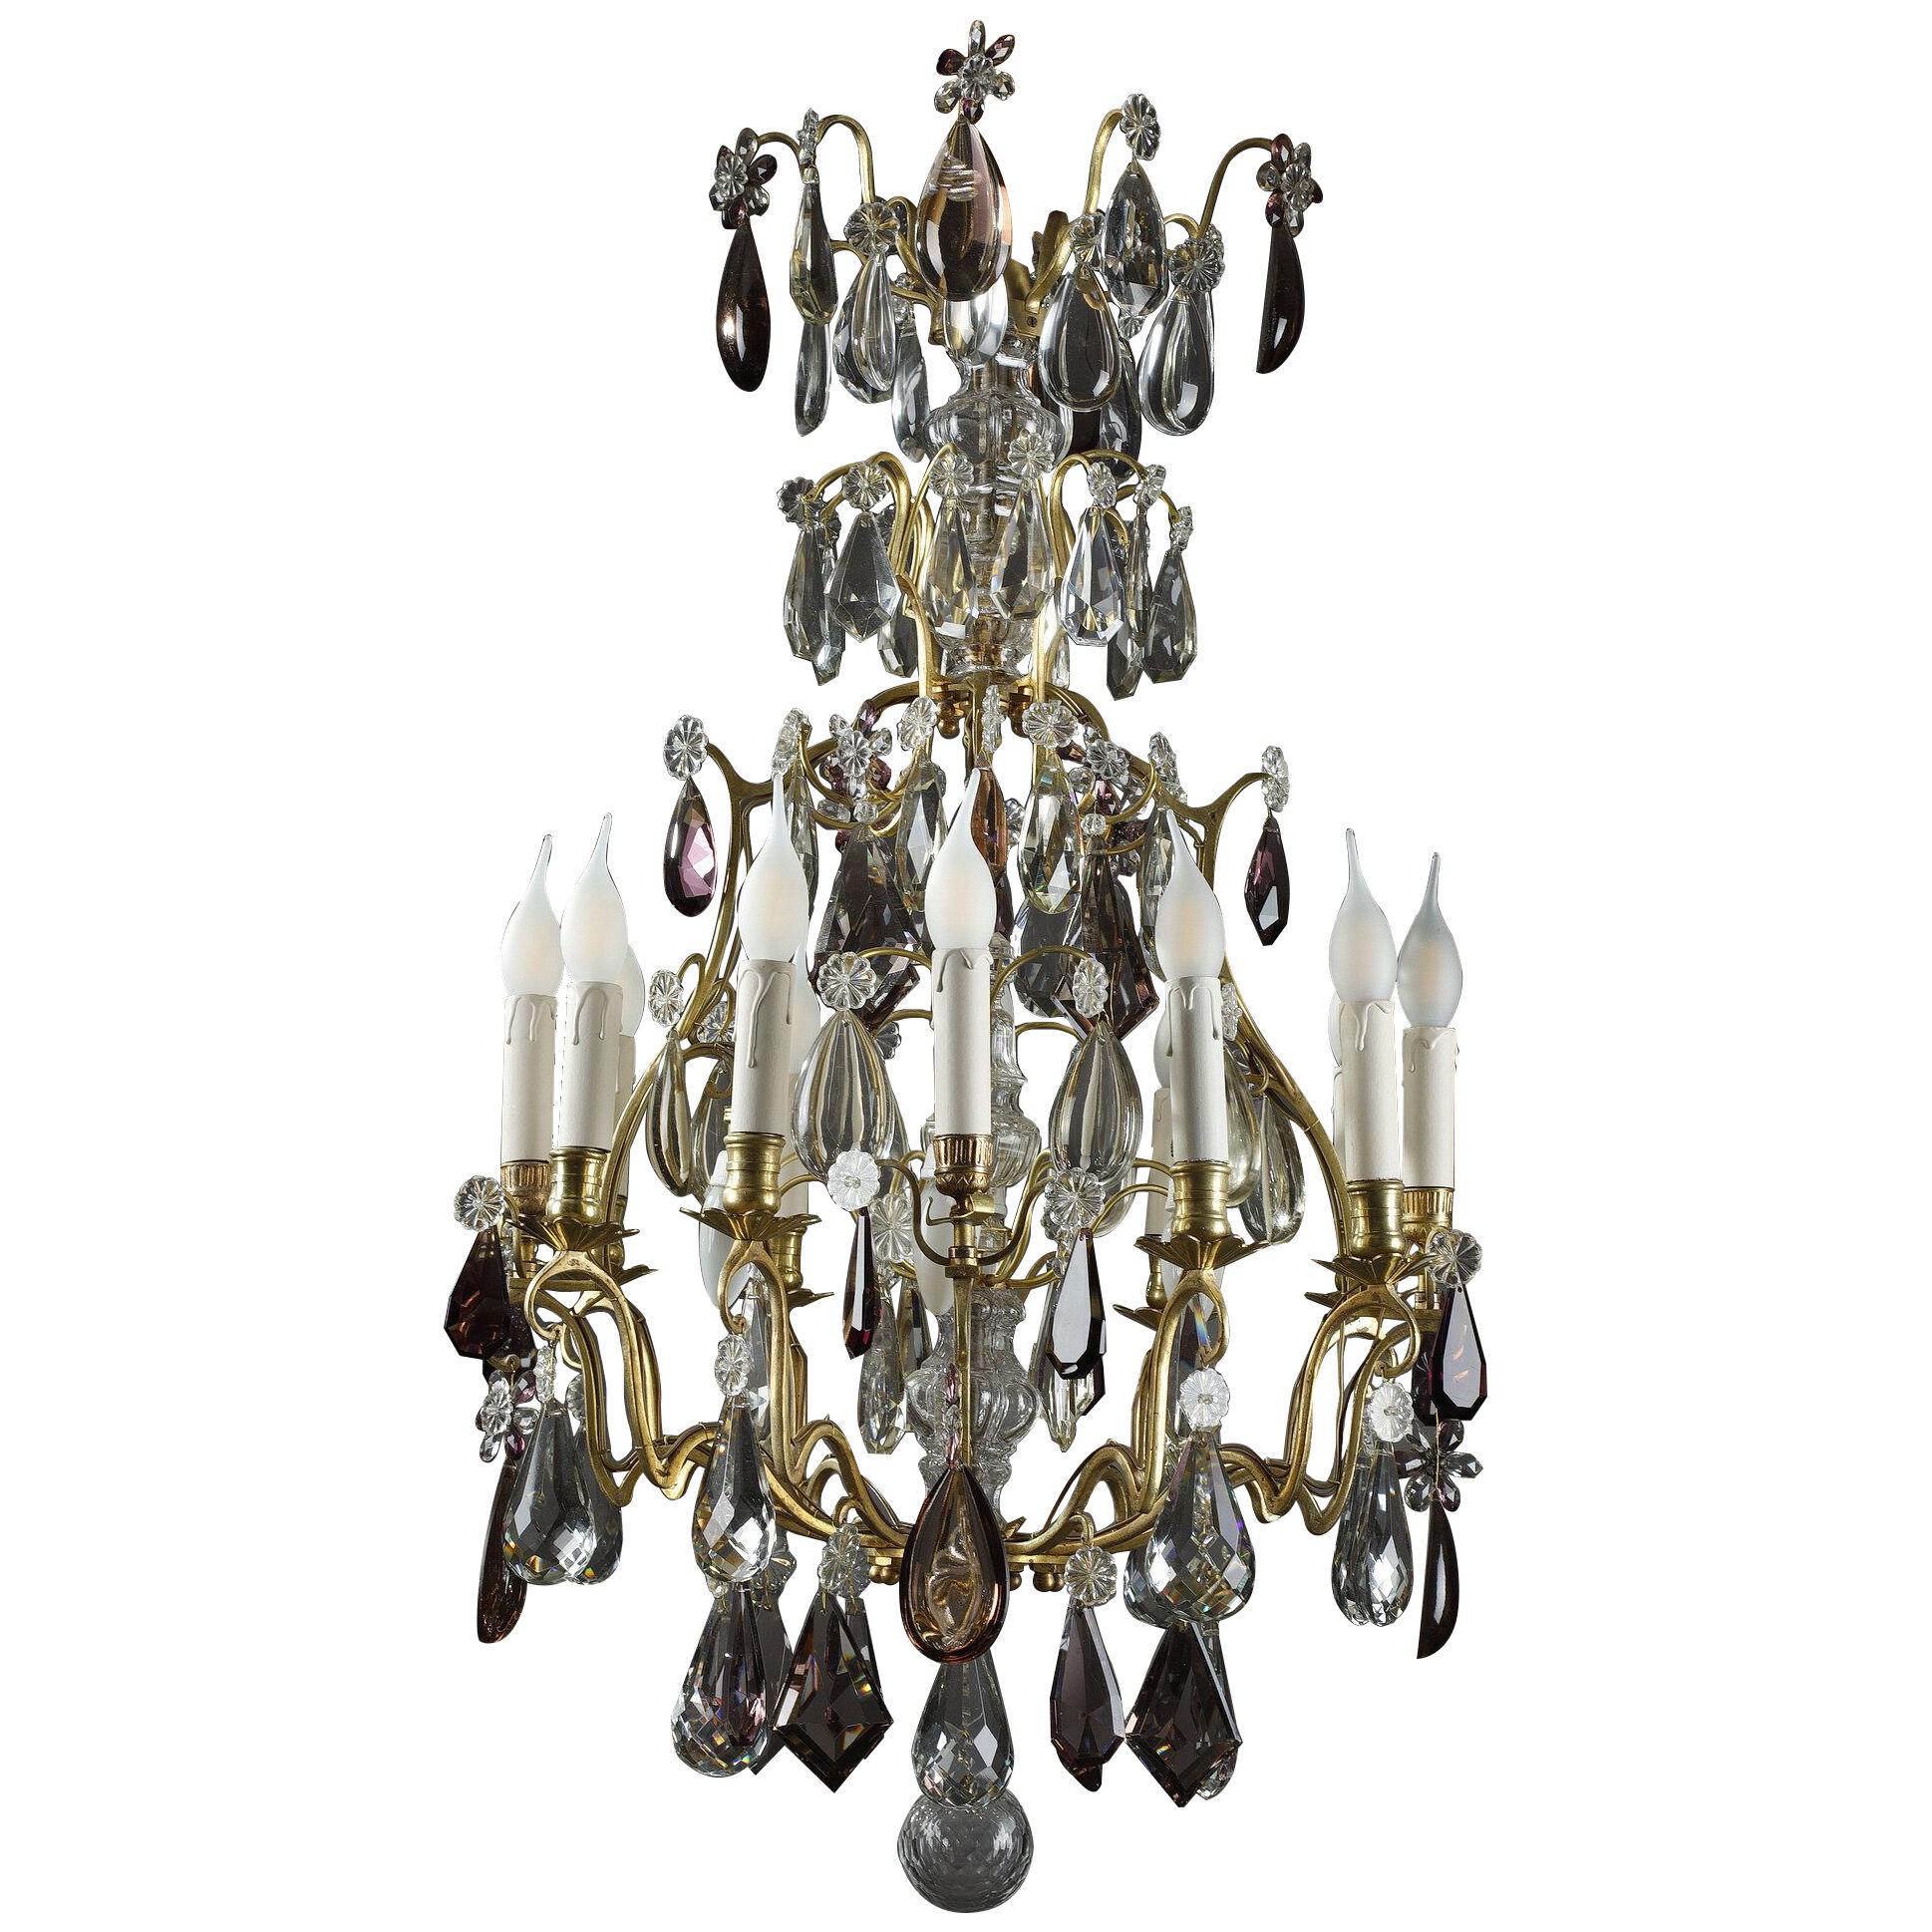 Large white and amethyst crystal Chandelier, late 19th century